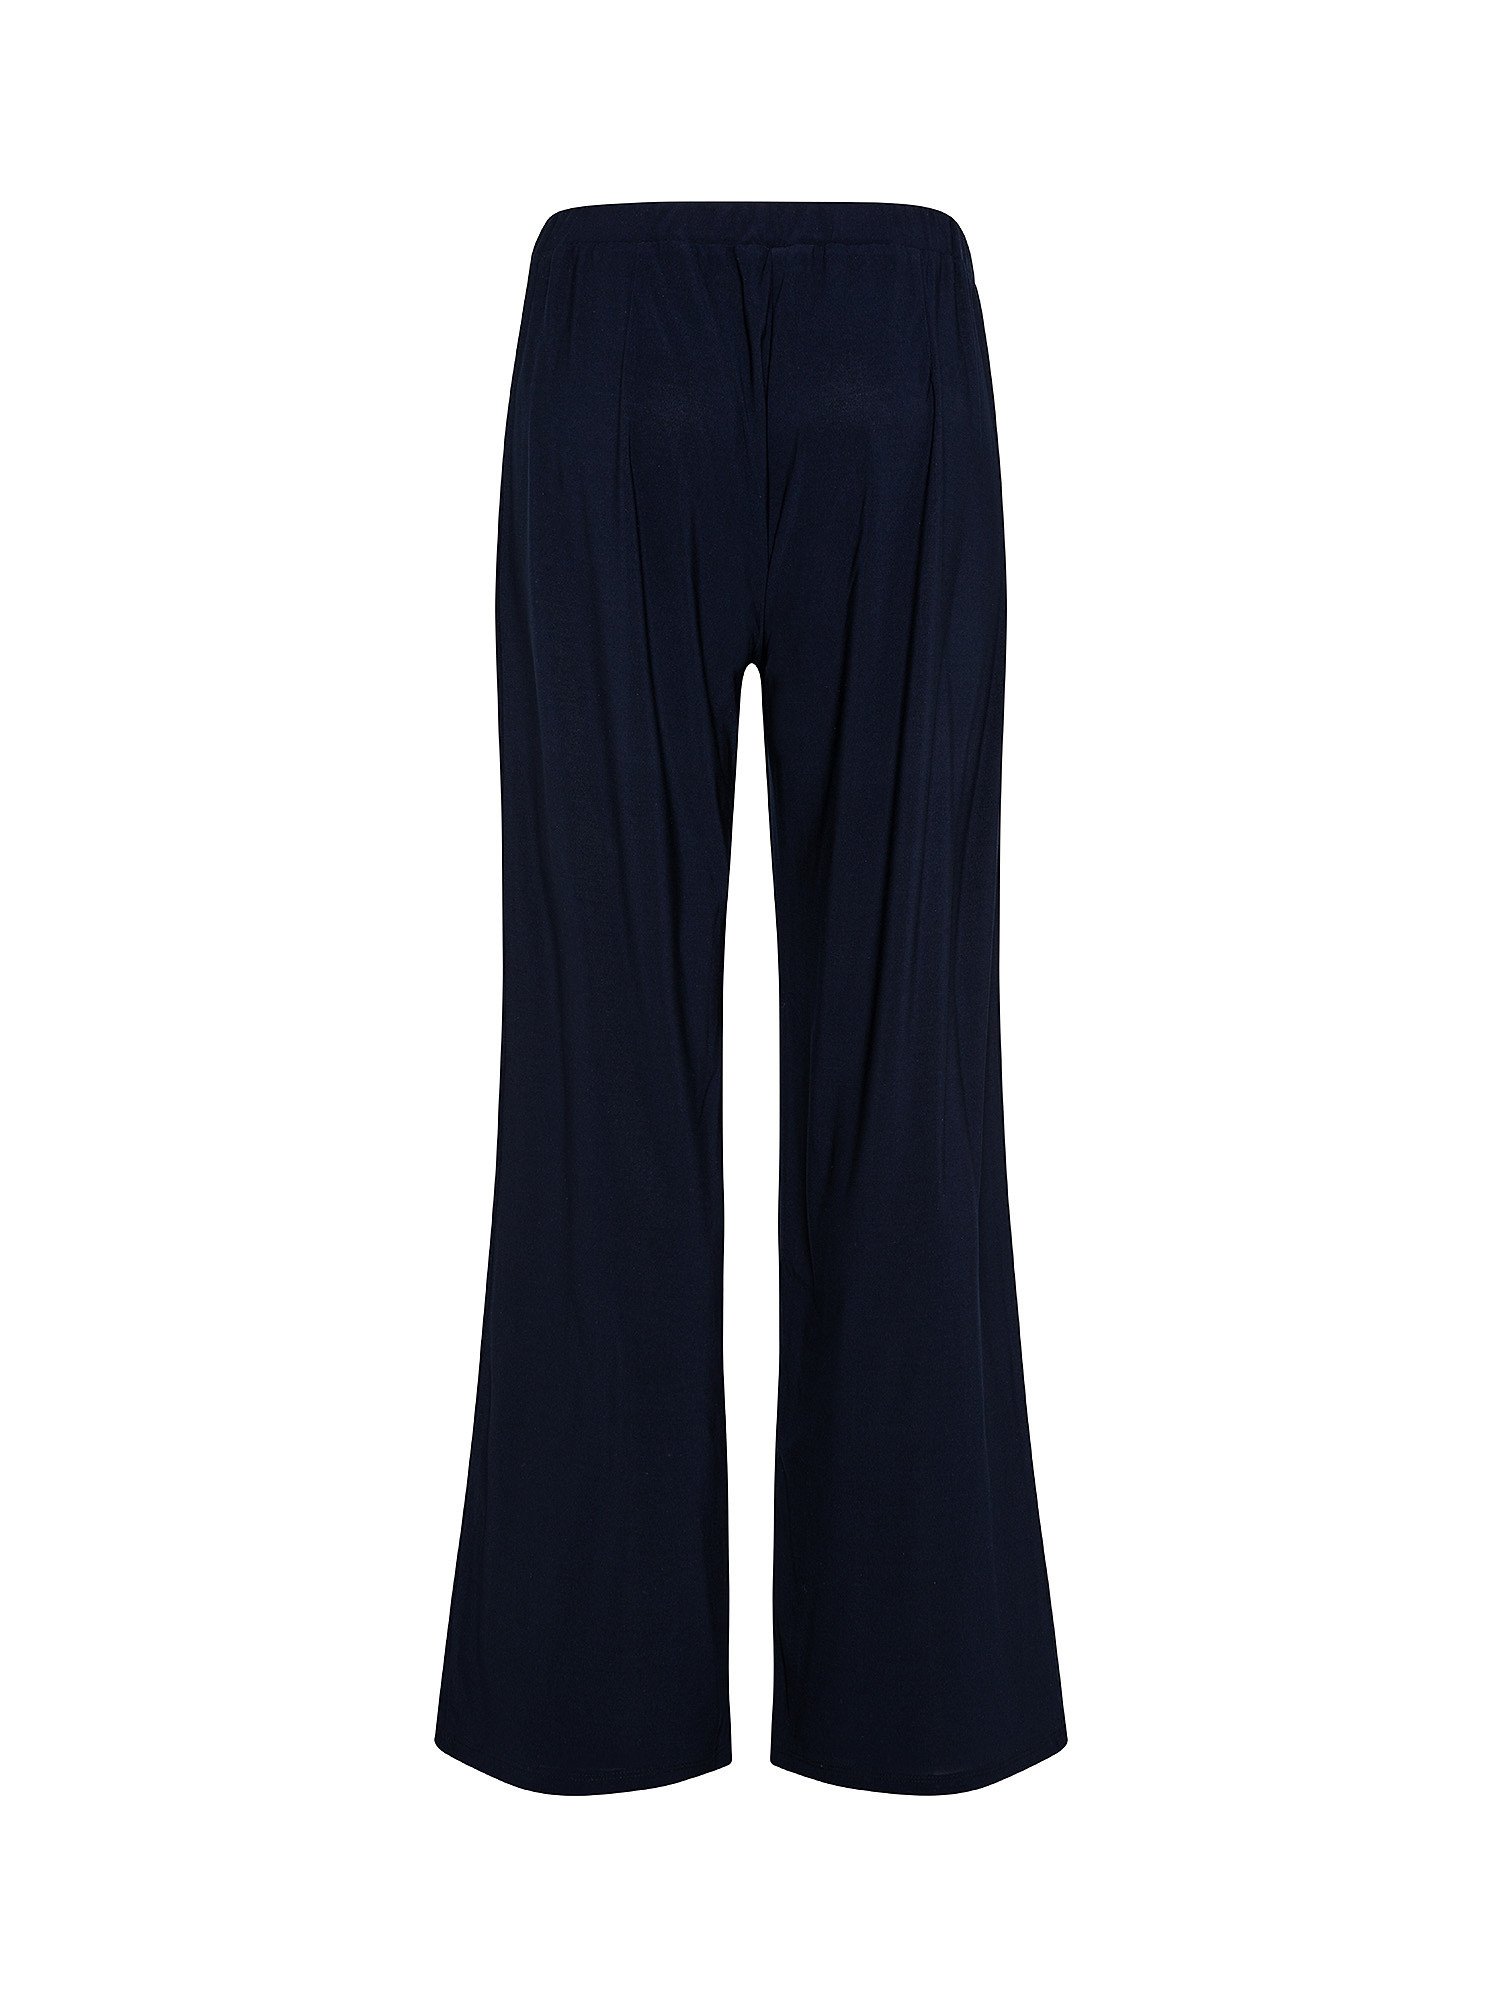 Wide leg trousers, Blue, large image number 1